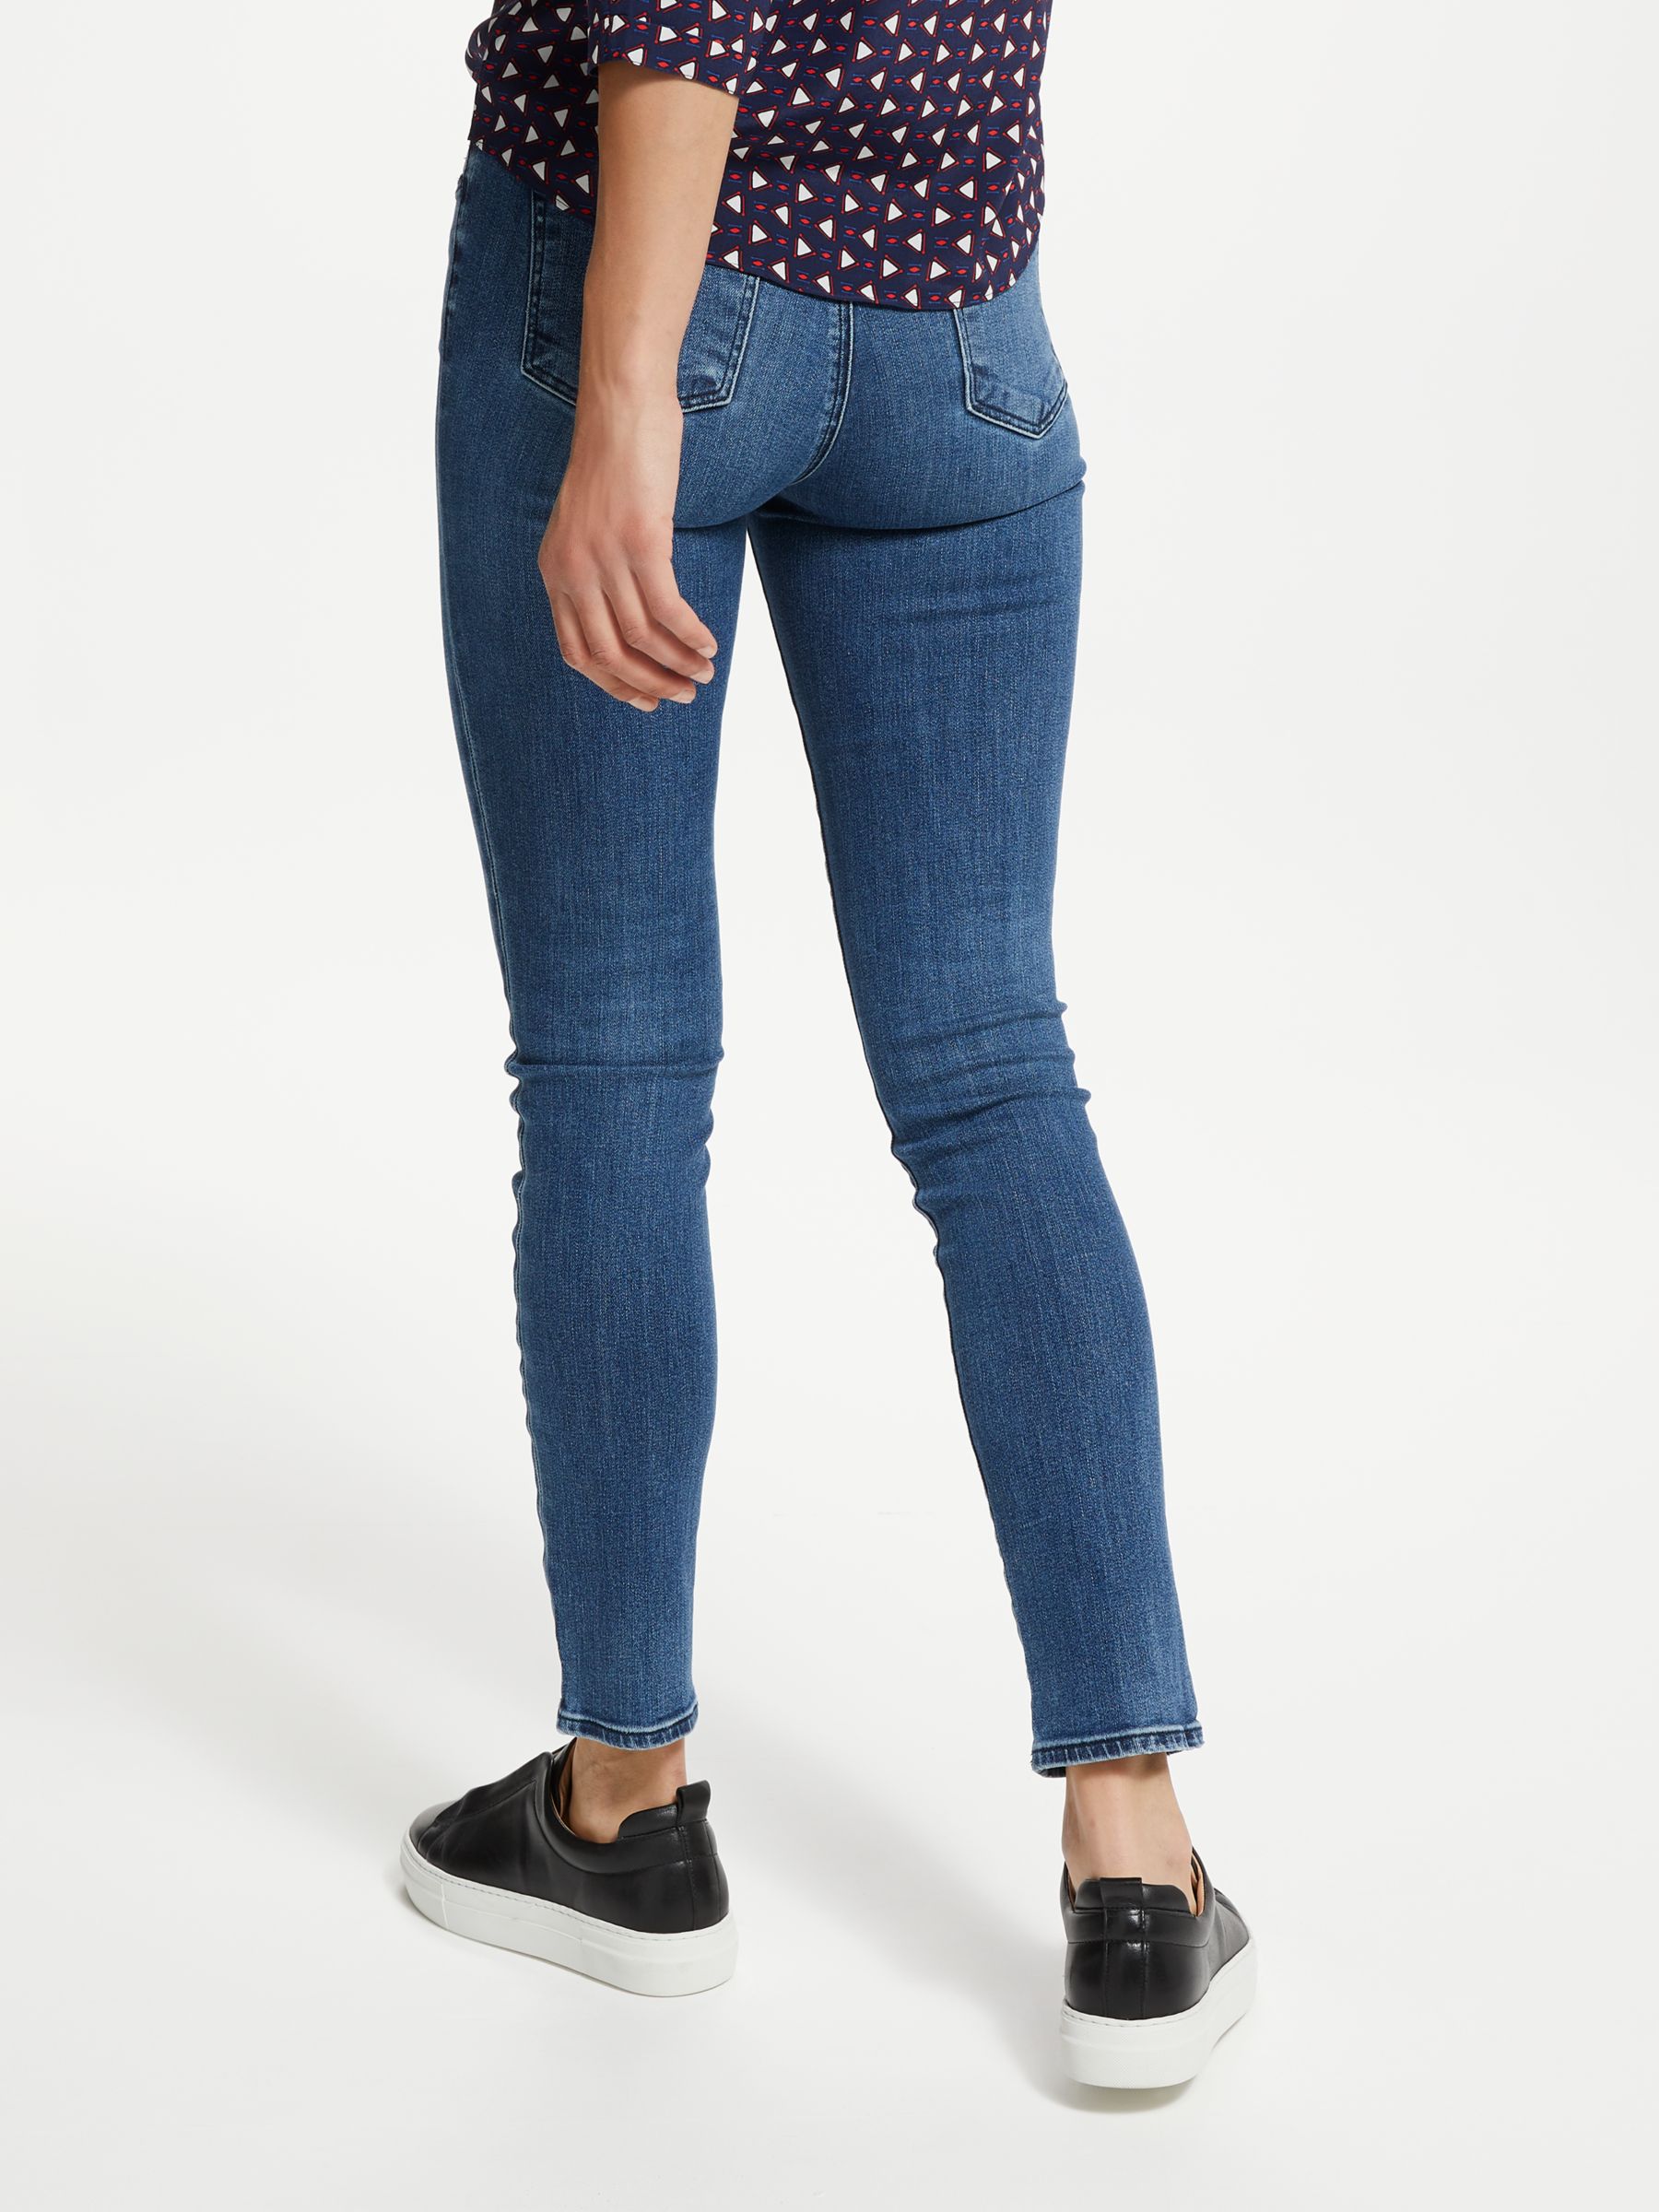 811 mid rise skinny jeans